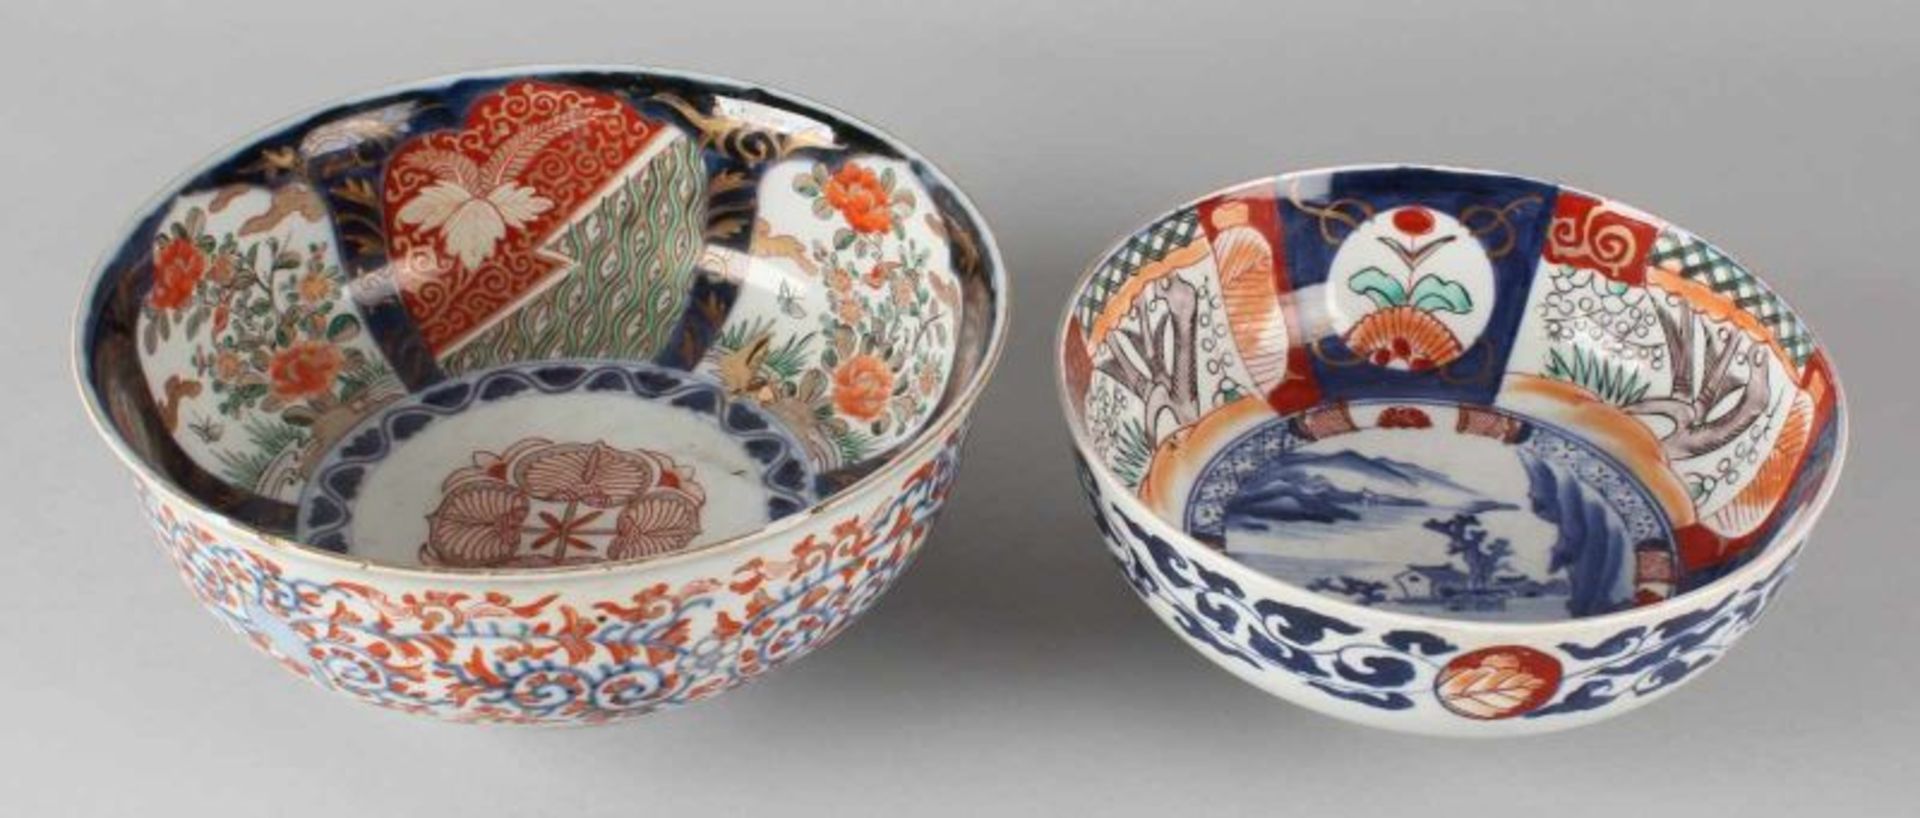 Two 19th century Imari porcelain bowls with landscape and / or floral decorations. (Larger bowl